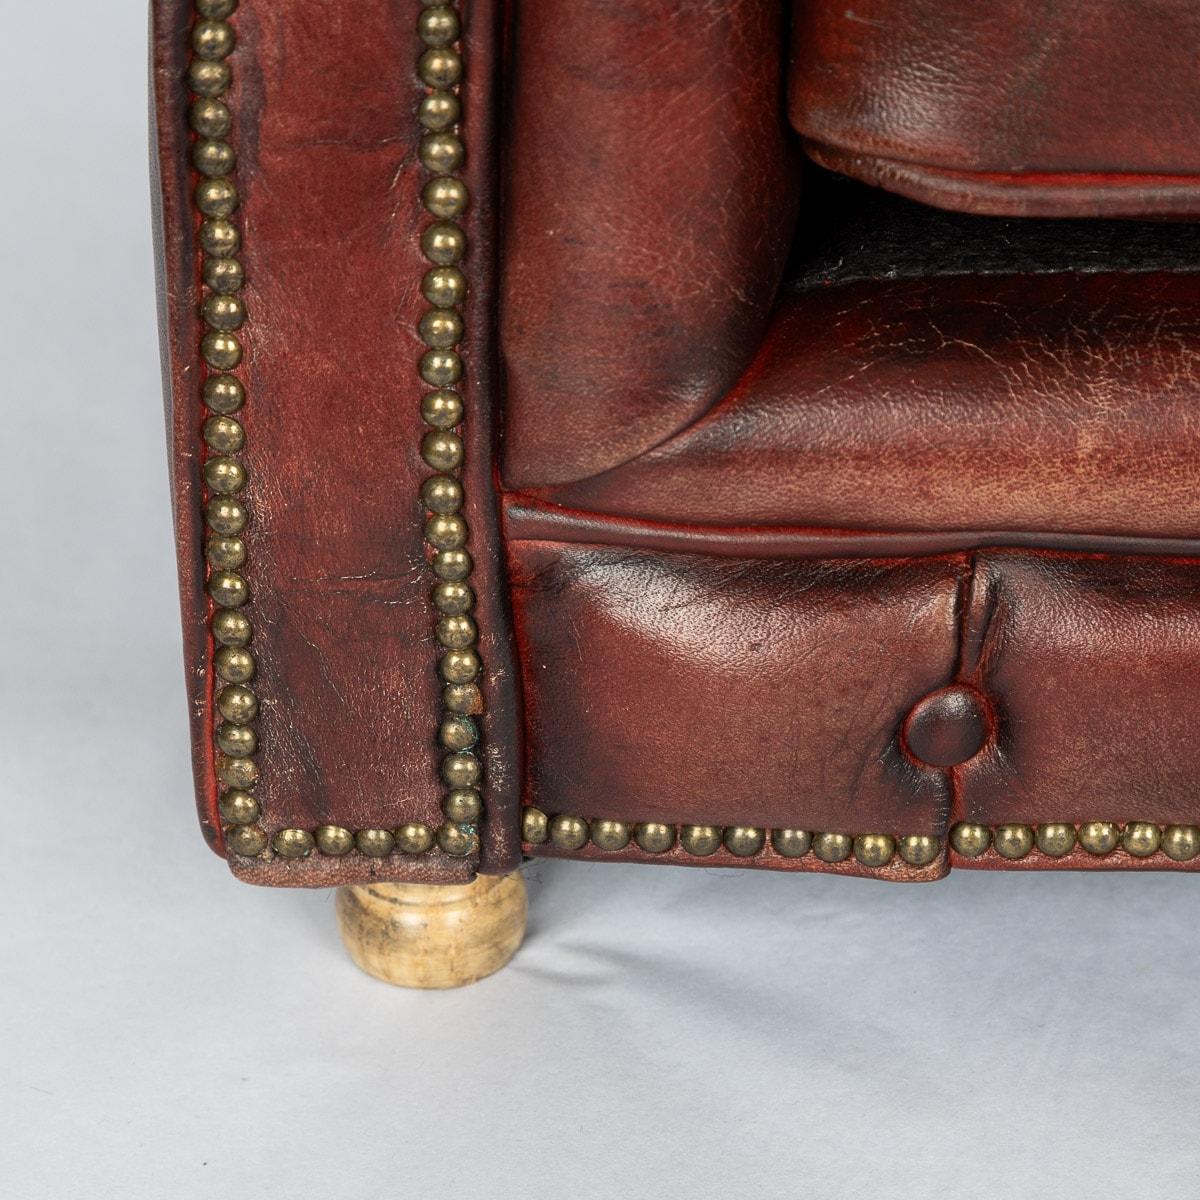 20th Century English Chesterfield Miniature Leather Sofa With Cushion Seats For Sale 7